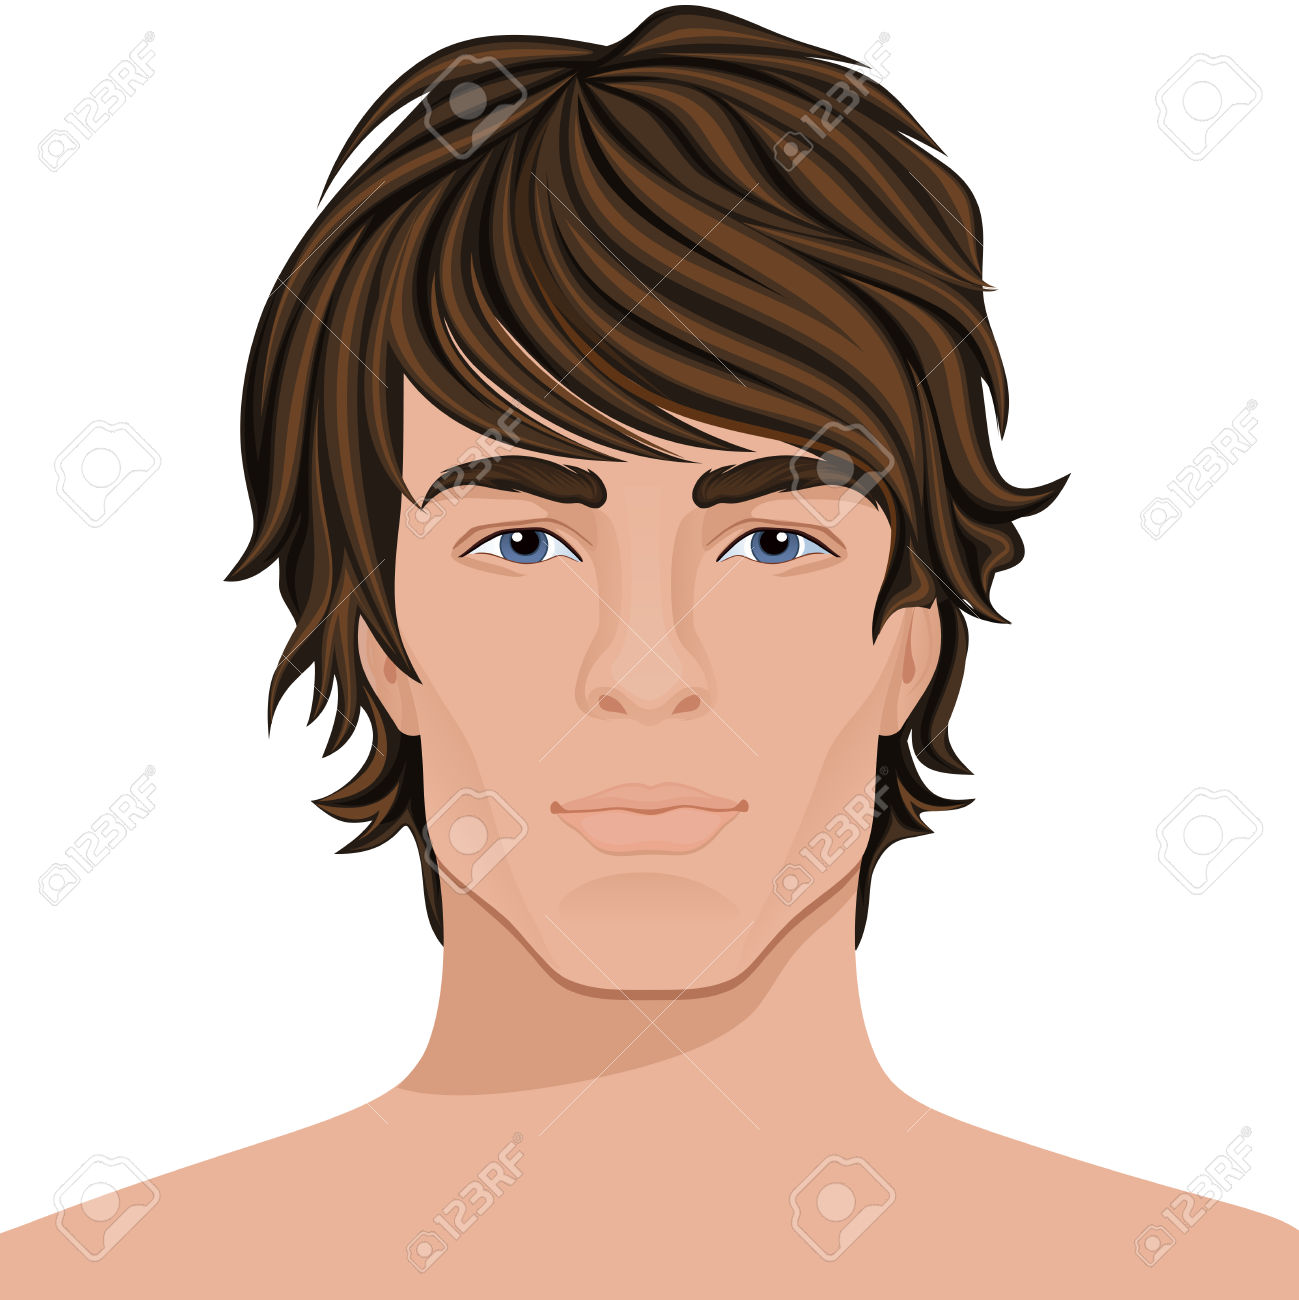 Best Sketch Drawing Of A Cartoon Guy With Brown Hair for Girl